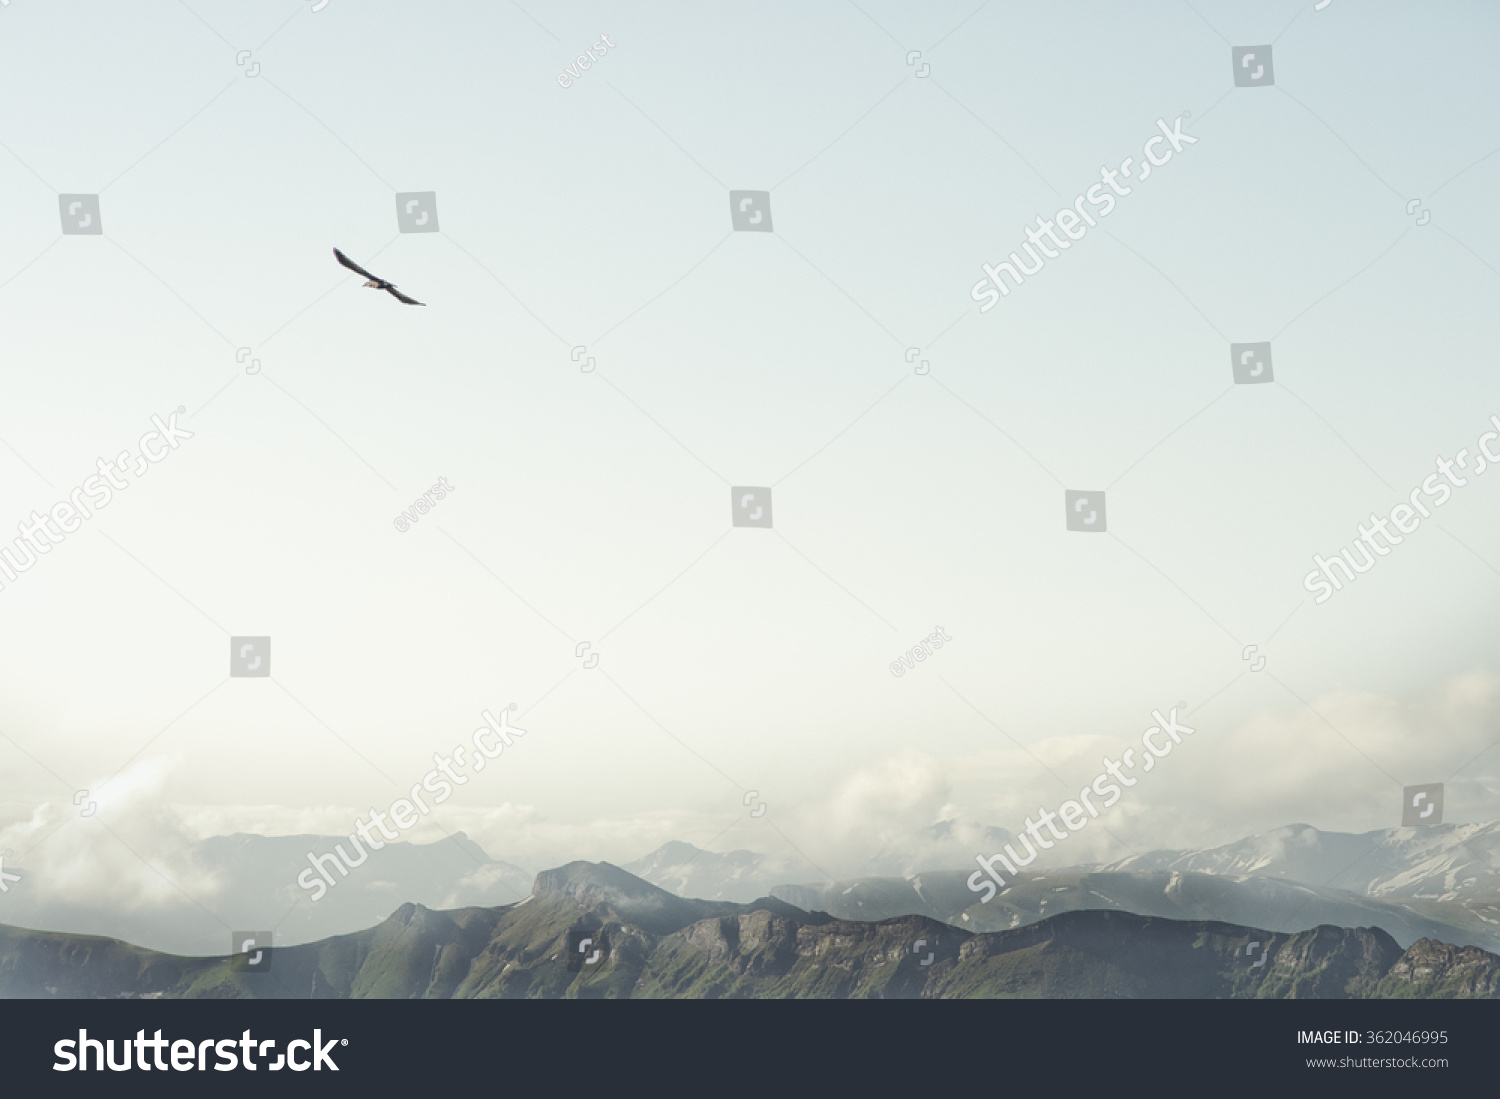 Rocky Mountains and flying eagle bird Landscape minimalistic style scenic aerial view  #362046995